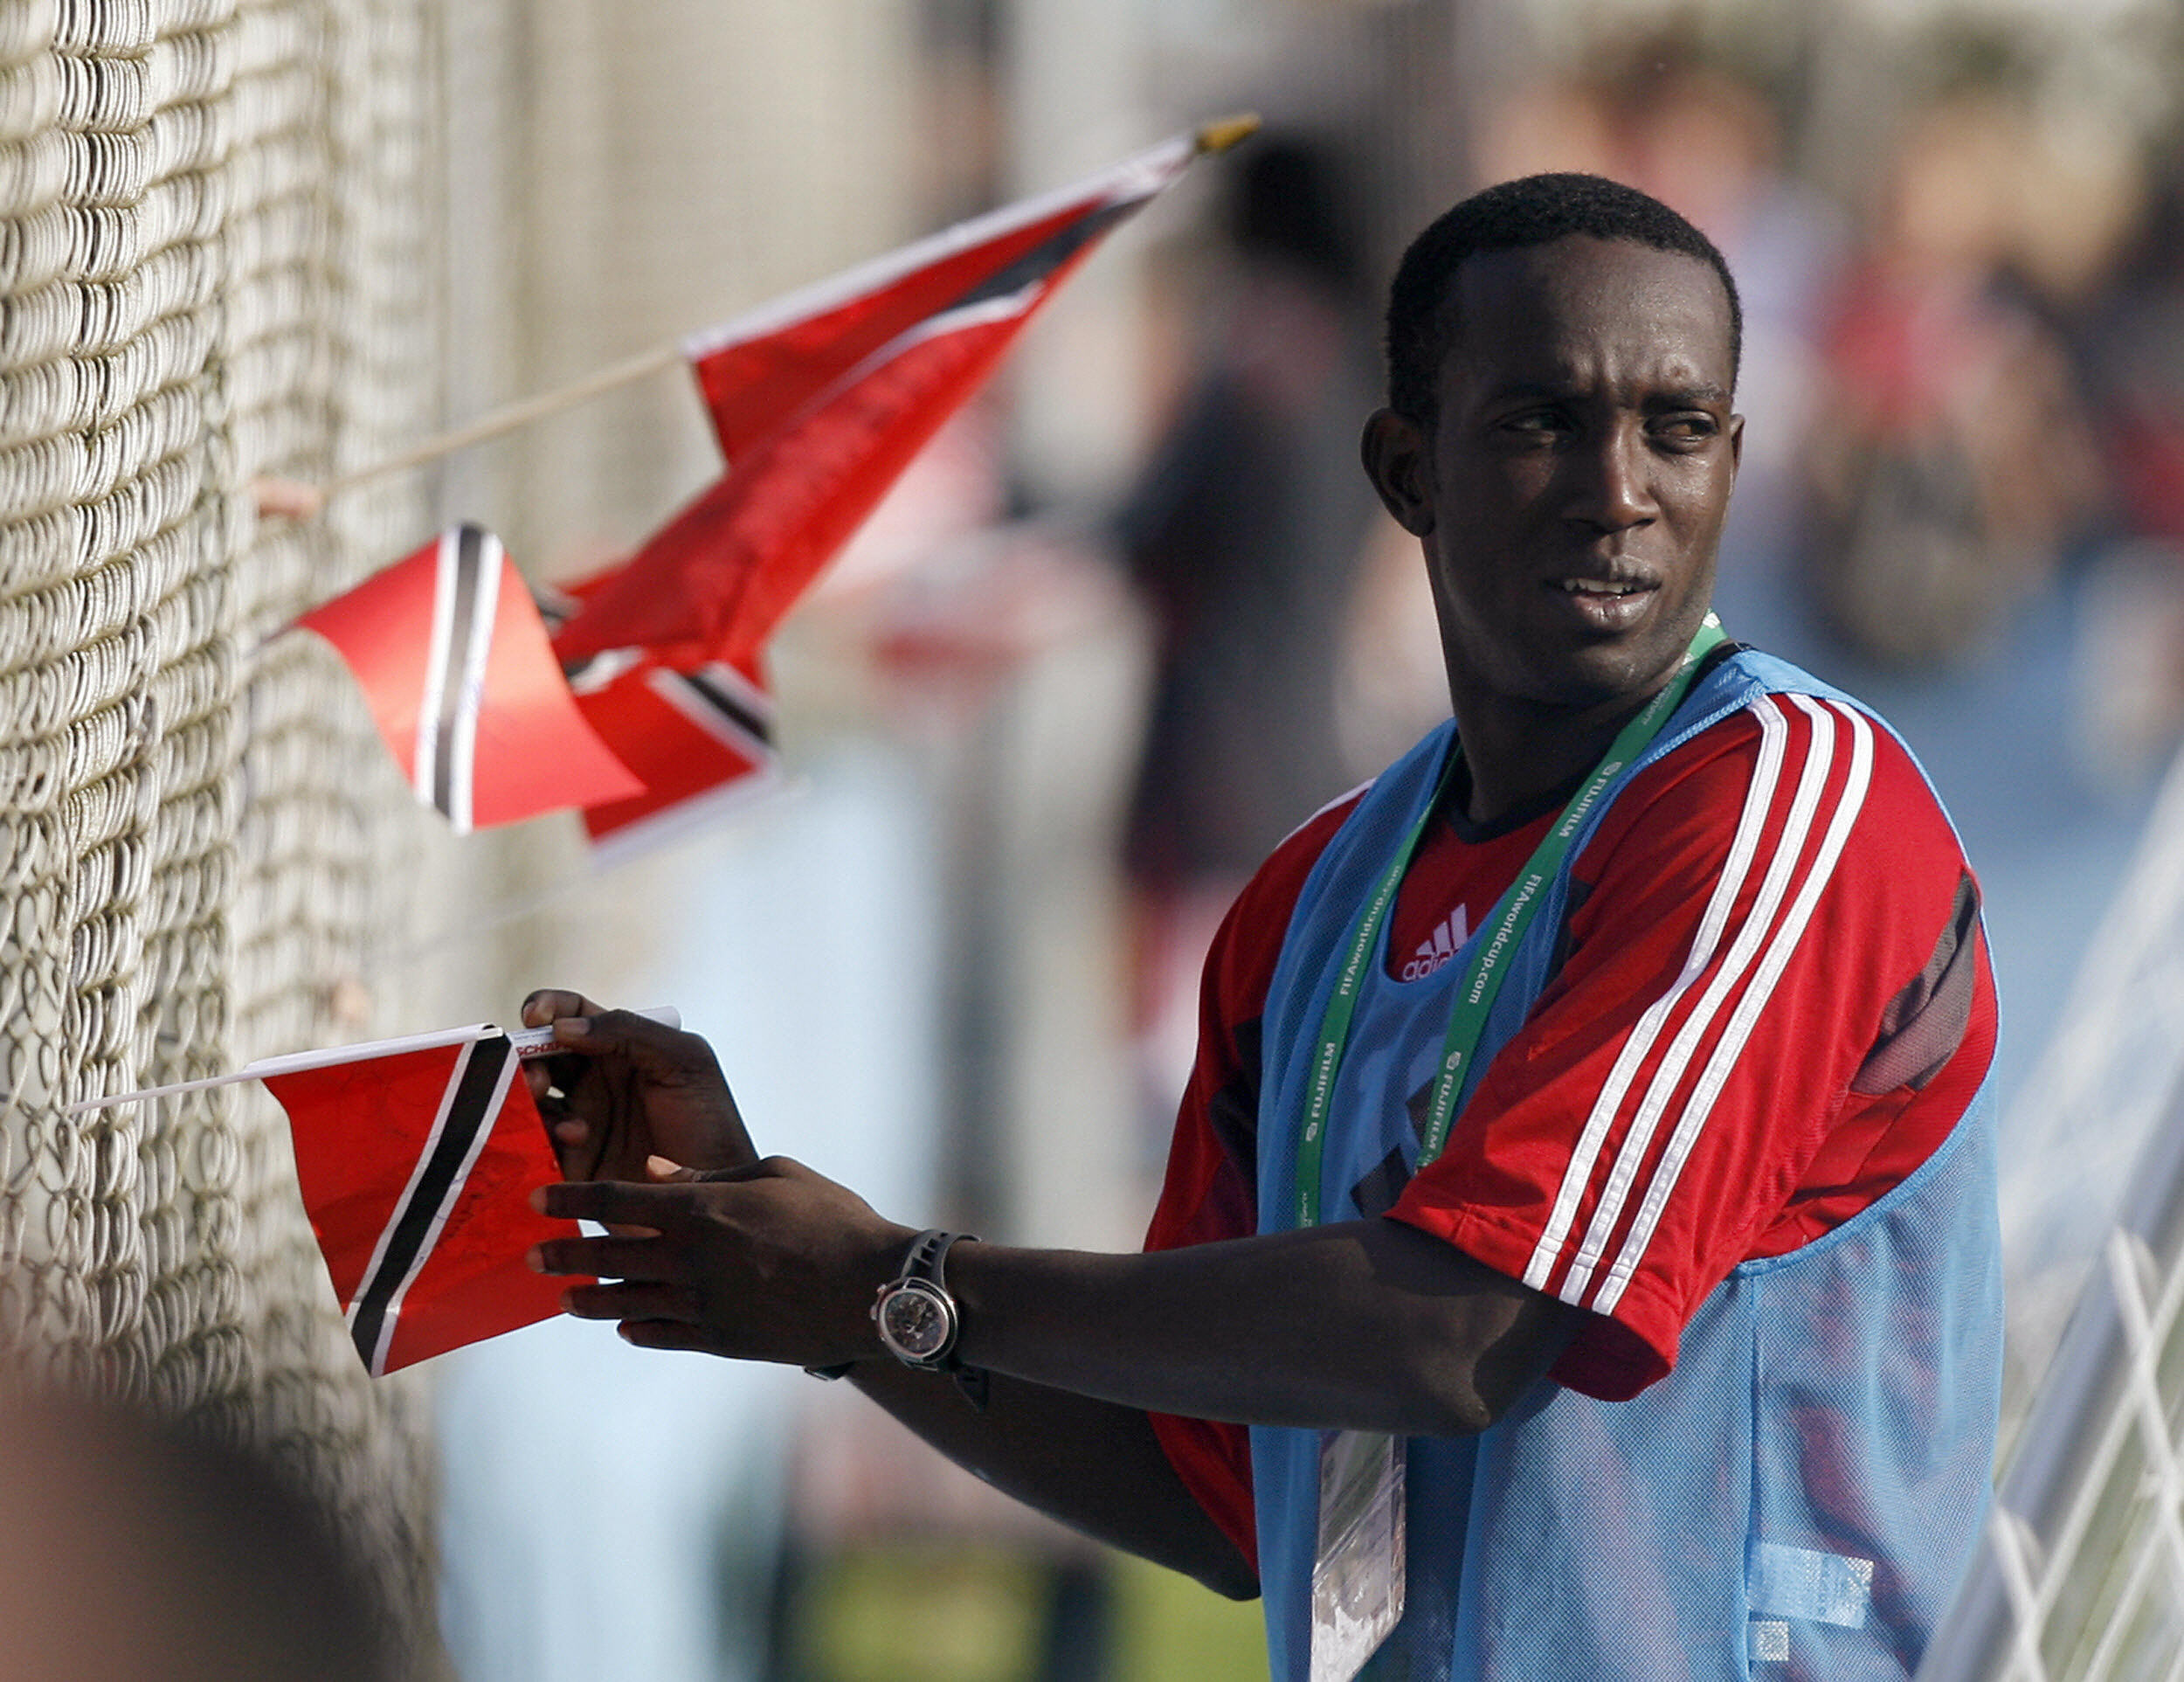 Trinidad and Tobago forward Dwight Yorke signs autographs for fans during a training session at the 2006 World Cup in Germany.